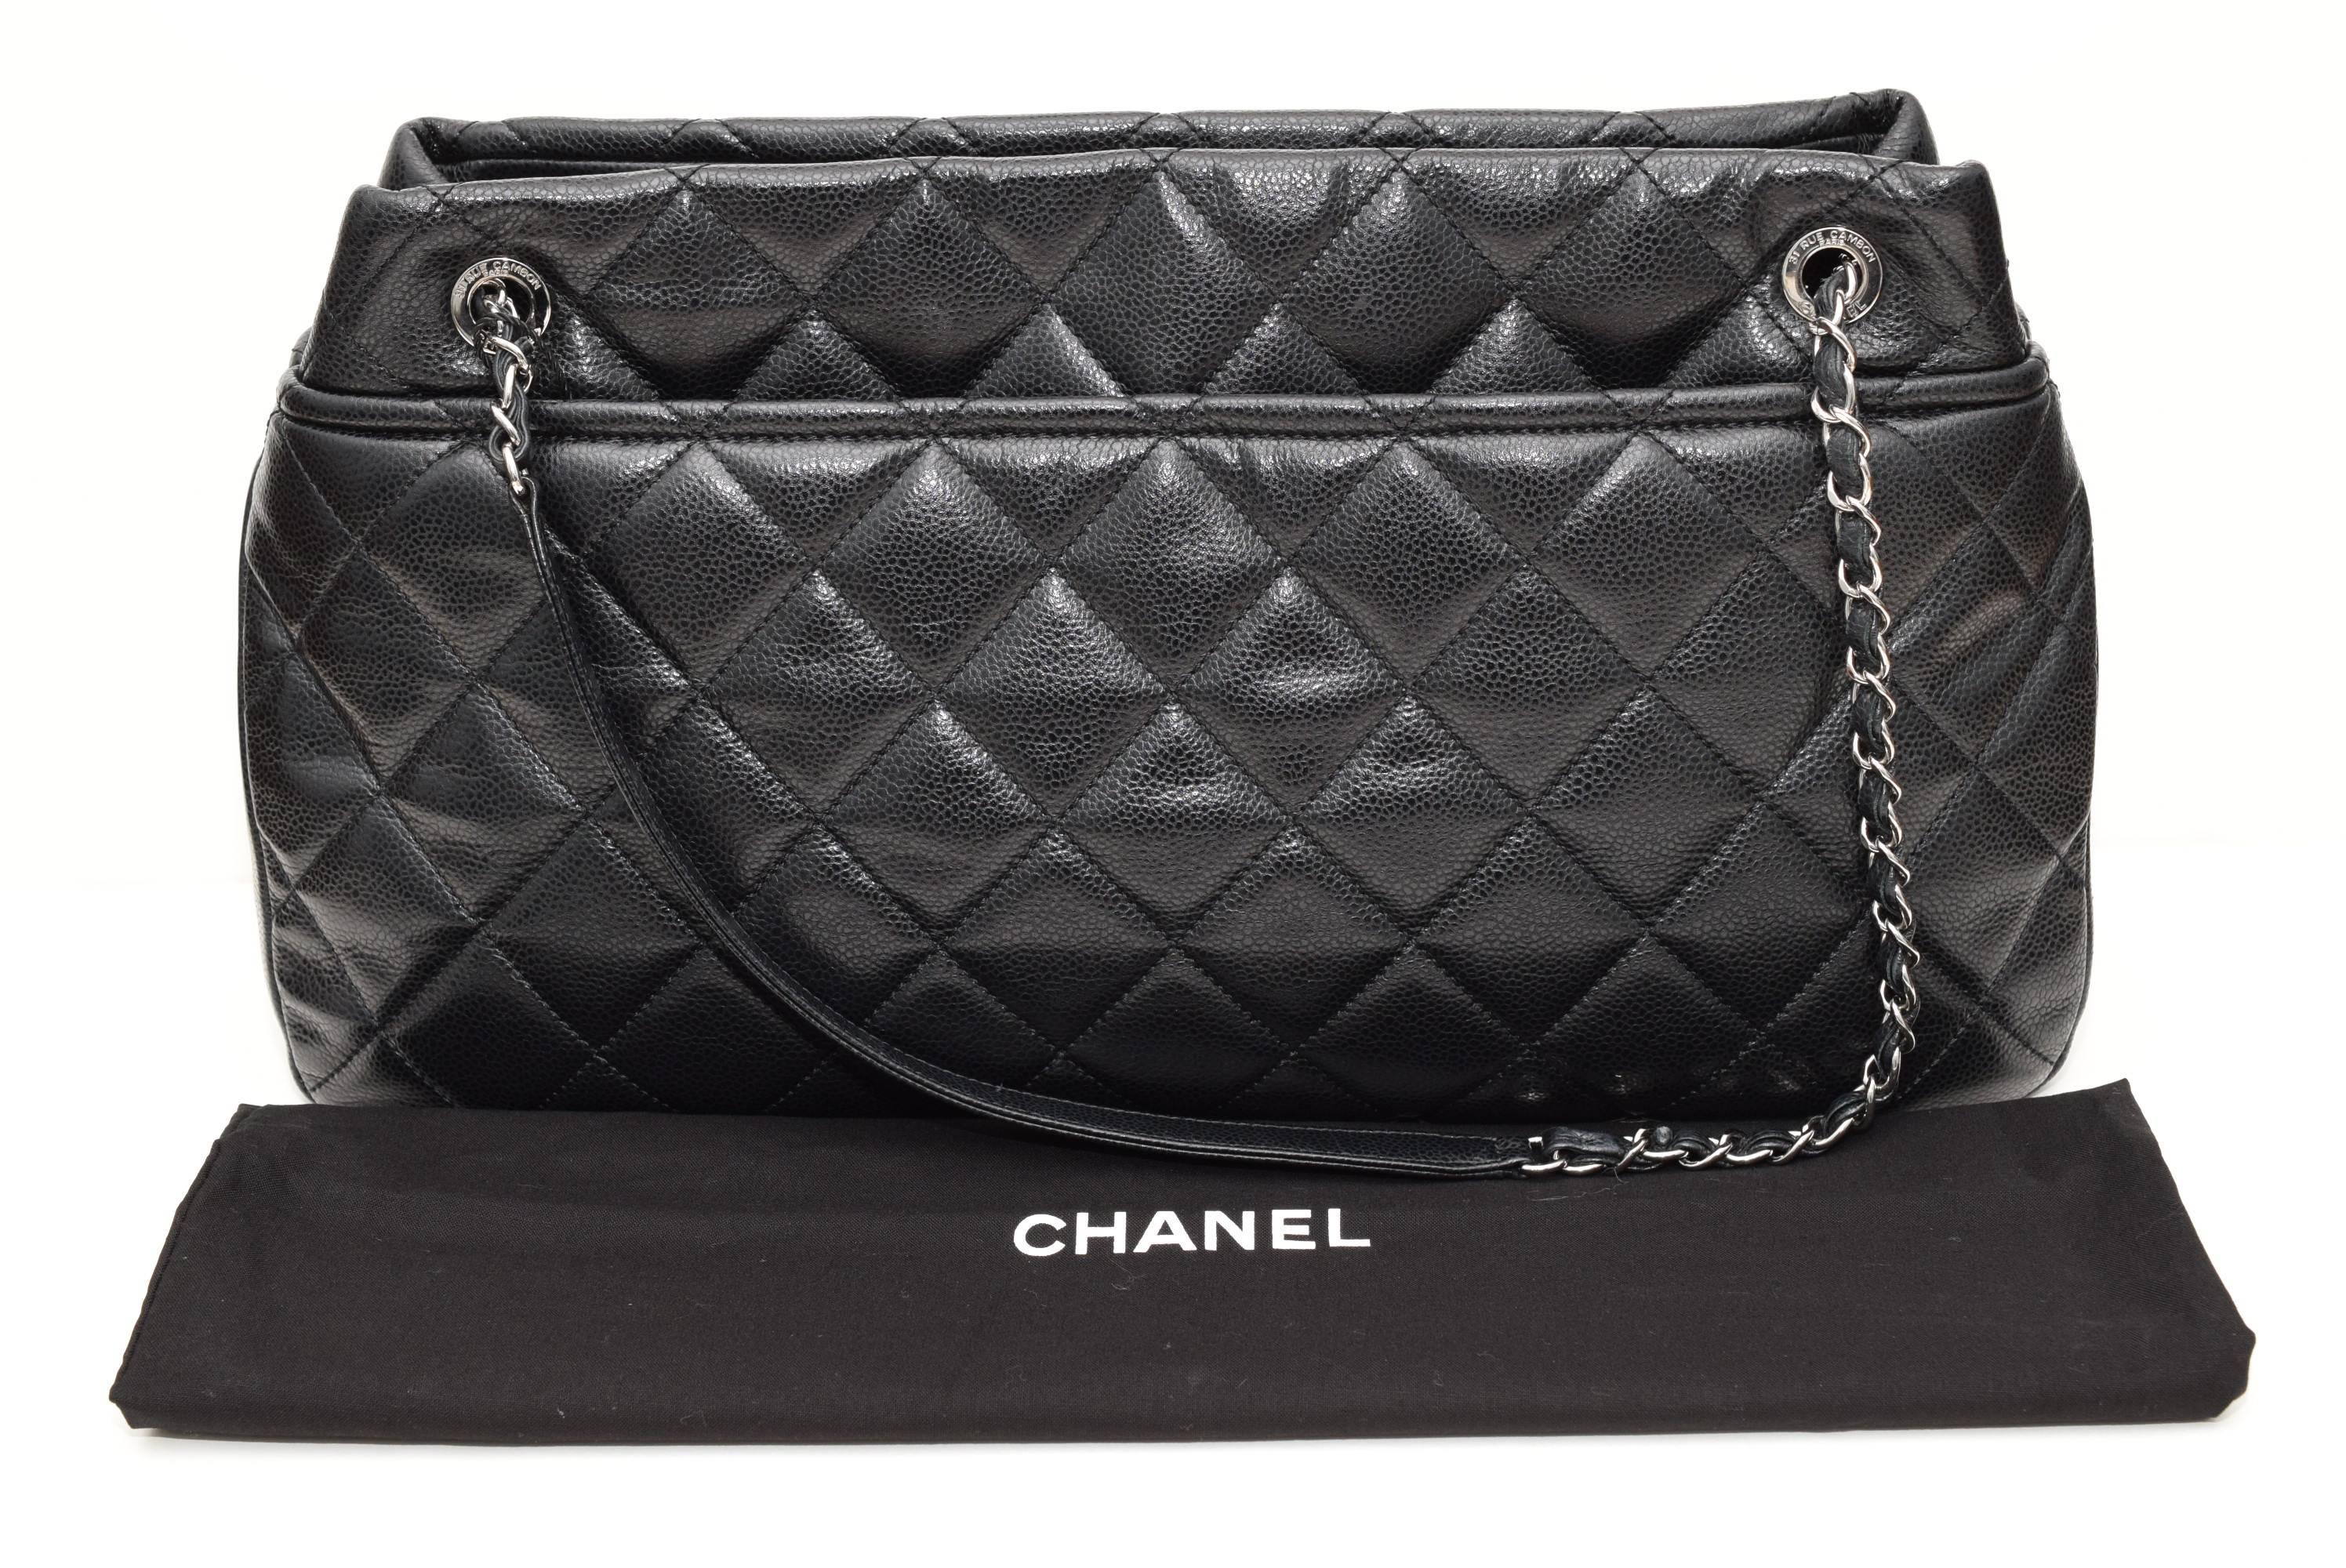 Chanel Black Caviar Leather Quilted New style Shoulder bag with Palladium Hardware .This bag is in 